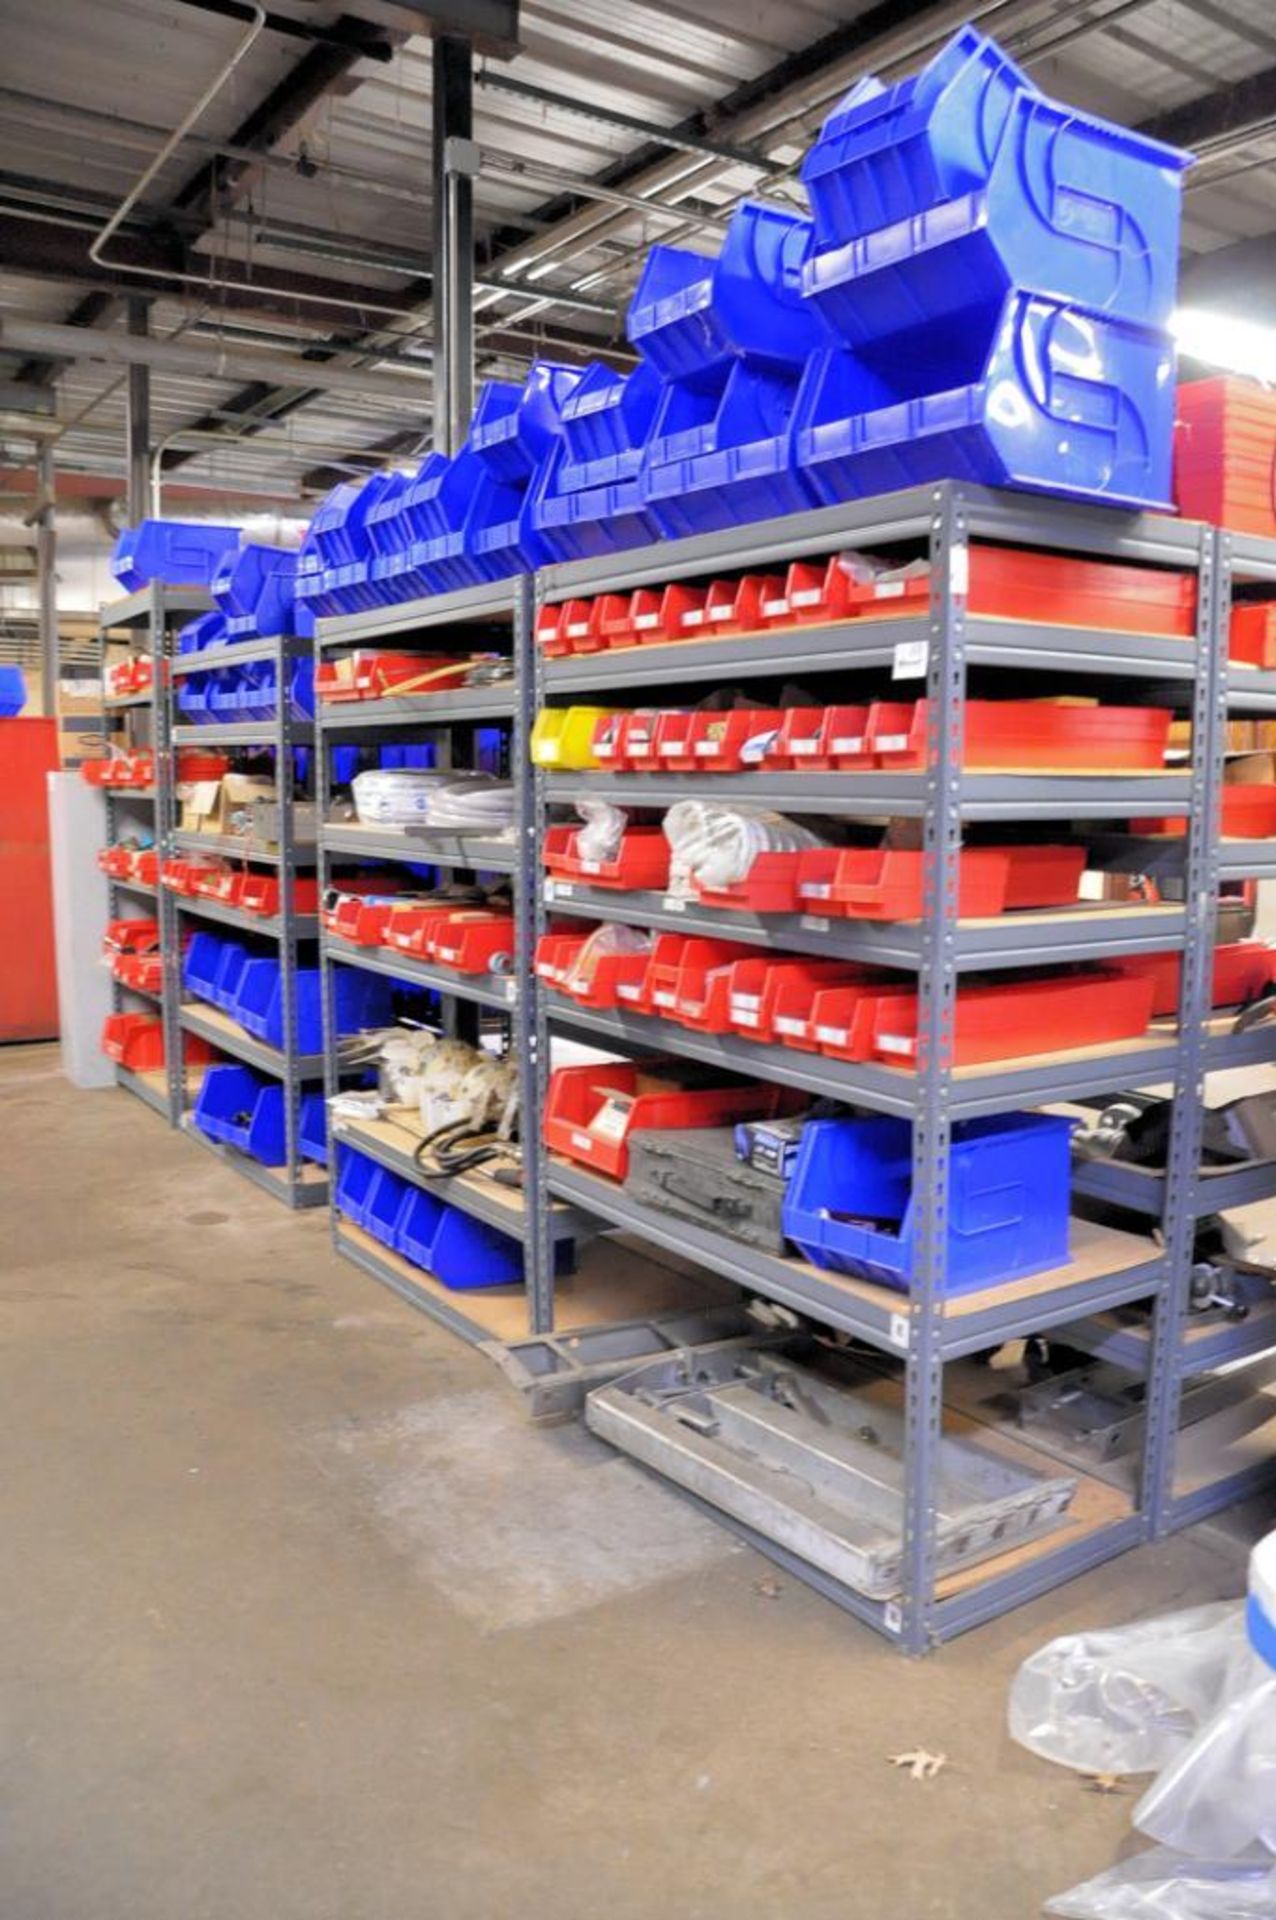 Lot - (8) Sections of Shelving with Diaphragm Pumps, Valves, Electronic Machine Parts, Pipe Fittings - Image 2 of 7